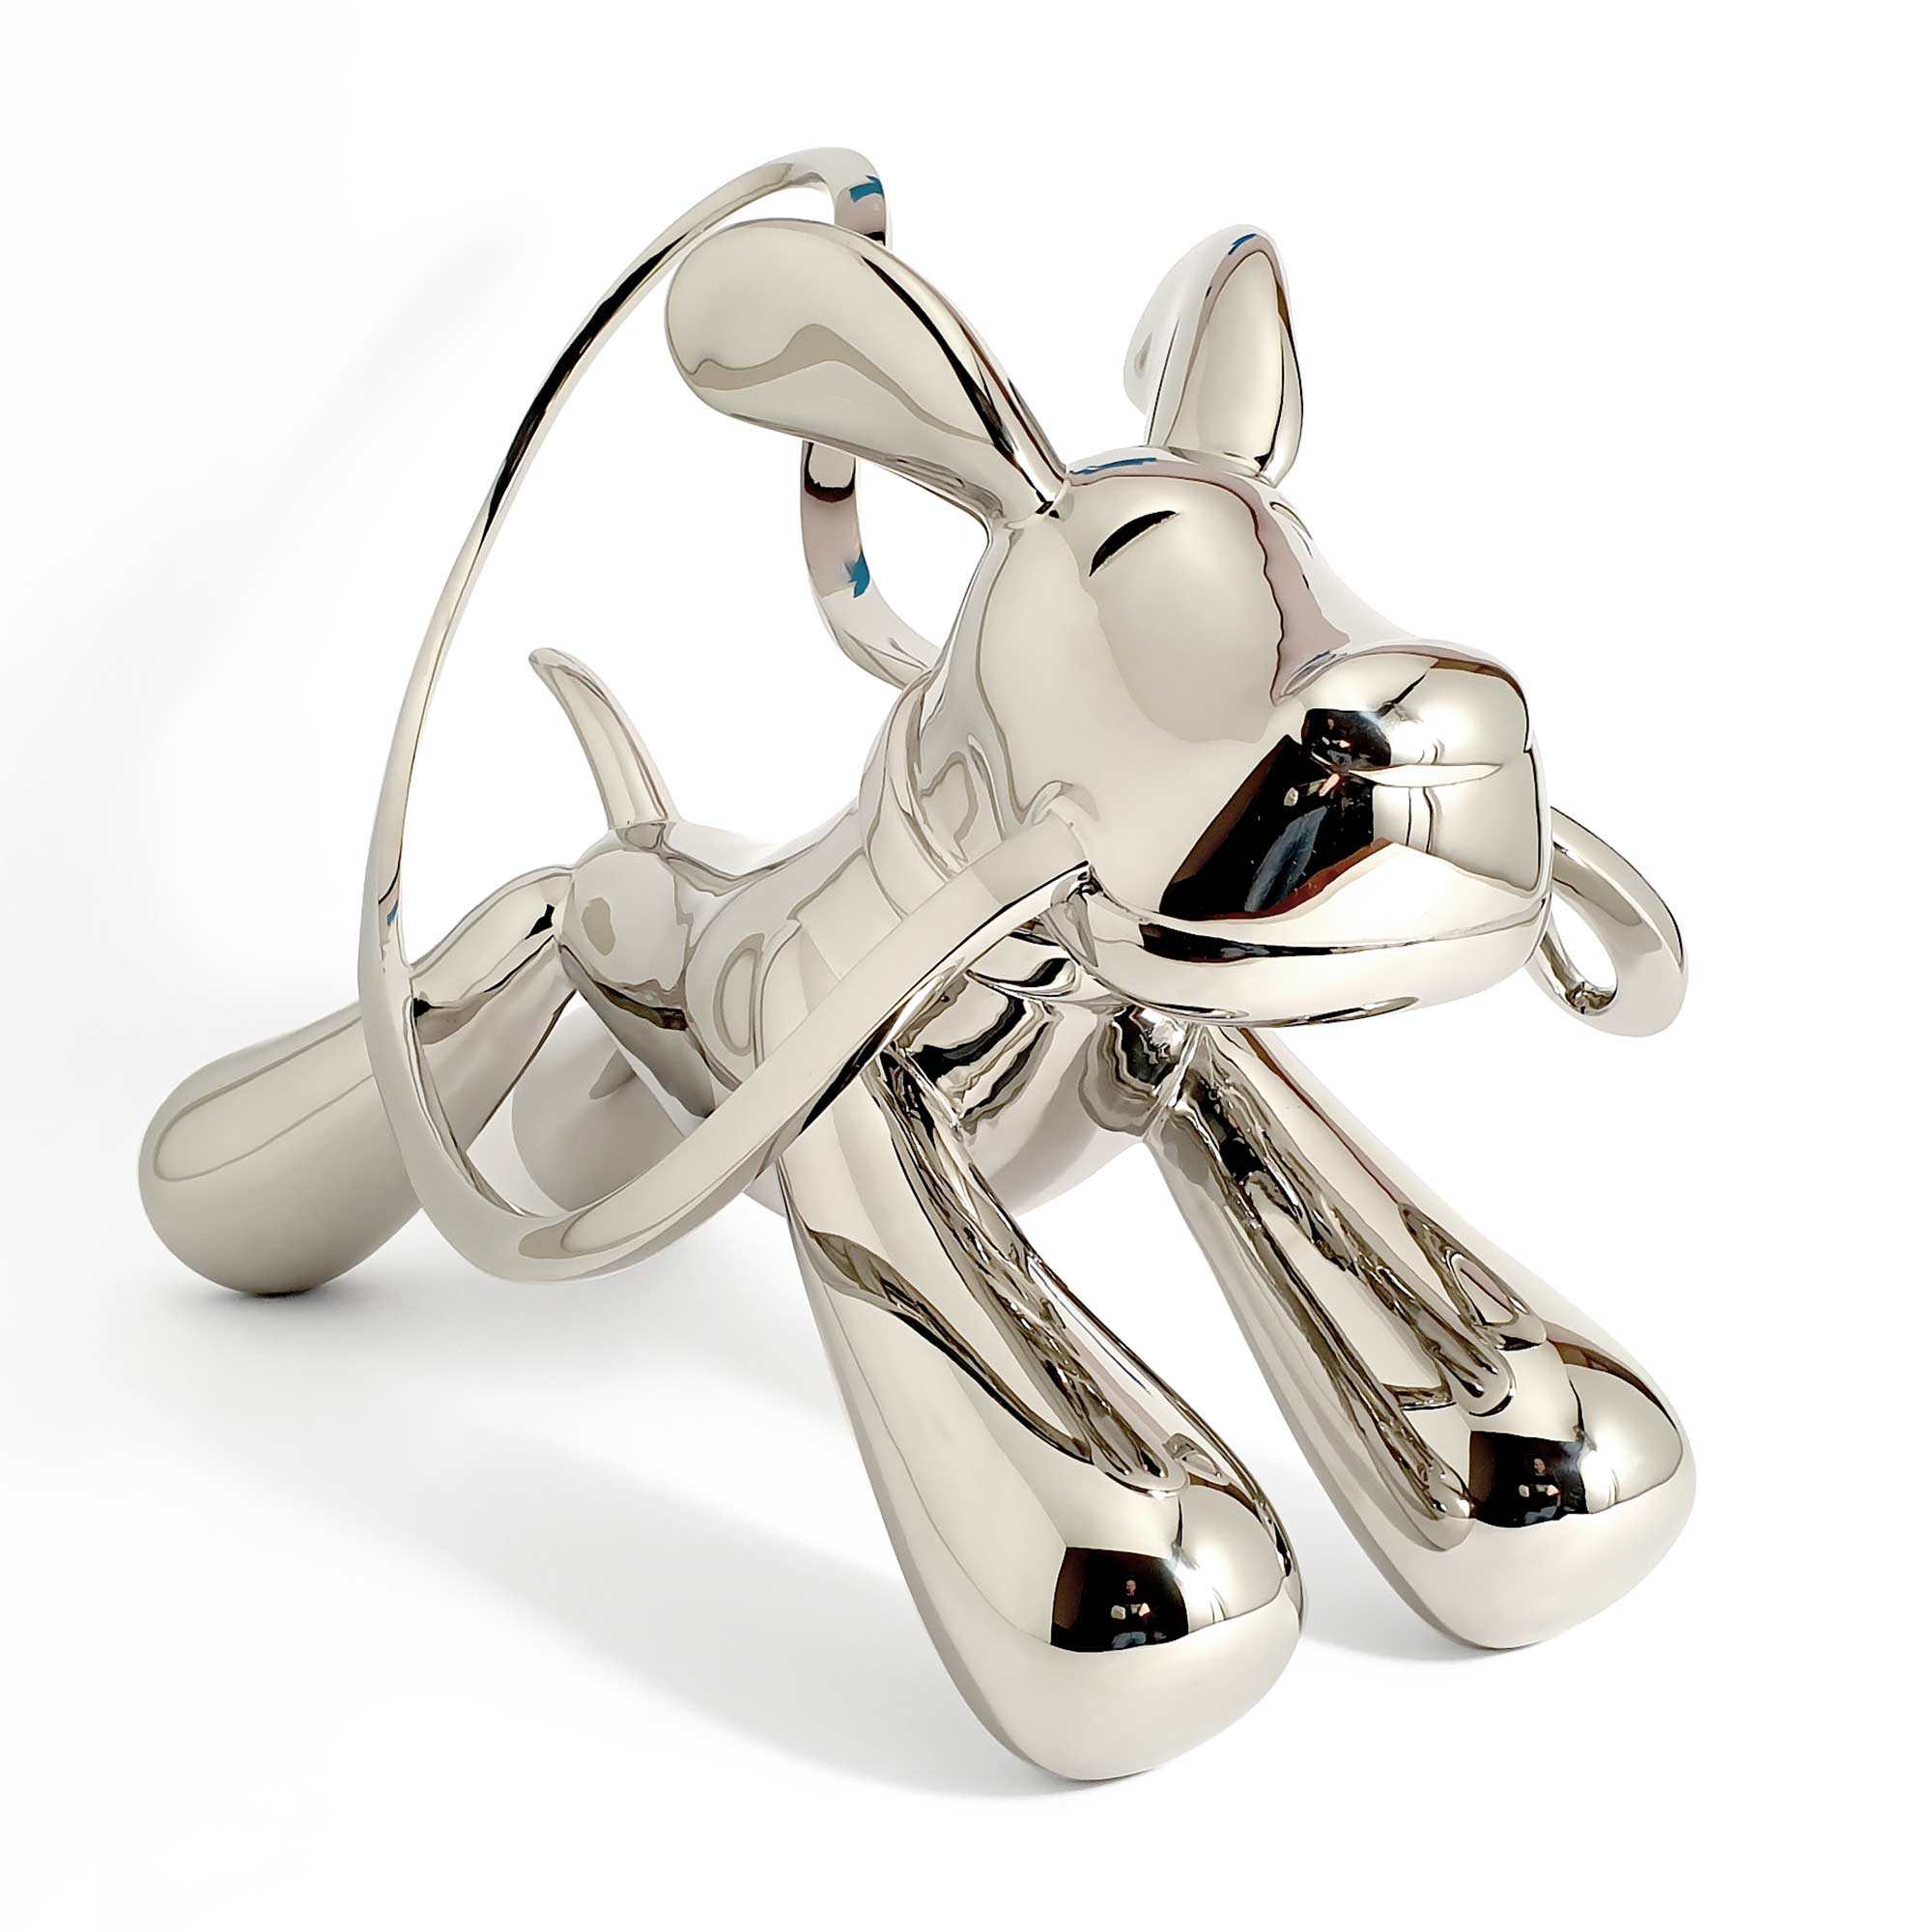 Taking the lead, dog sculpture, Mirror Polished Stainless Steel Sculpture, by artist Ferdi B Dick, hero view